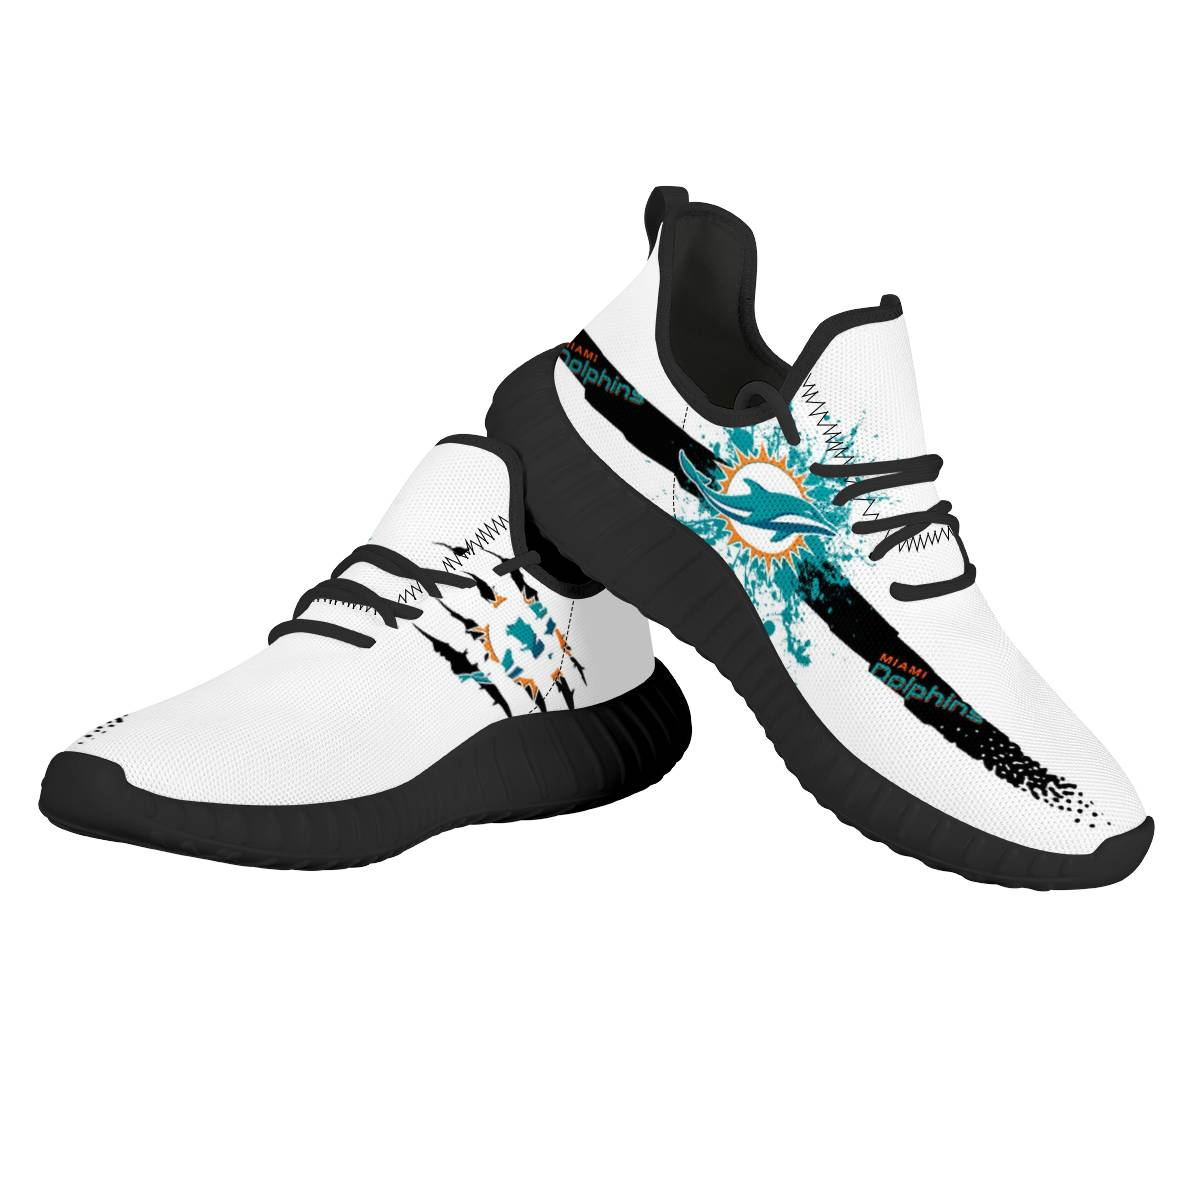 Women's NFL Miami Dolphins Mesh Knit Sneakers/Shoes 003